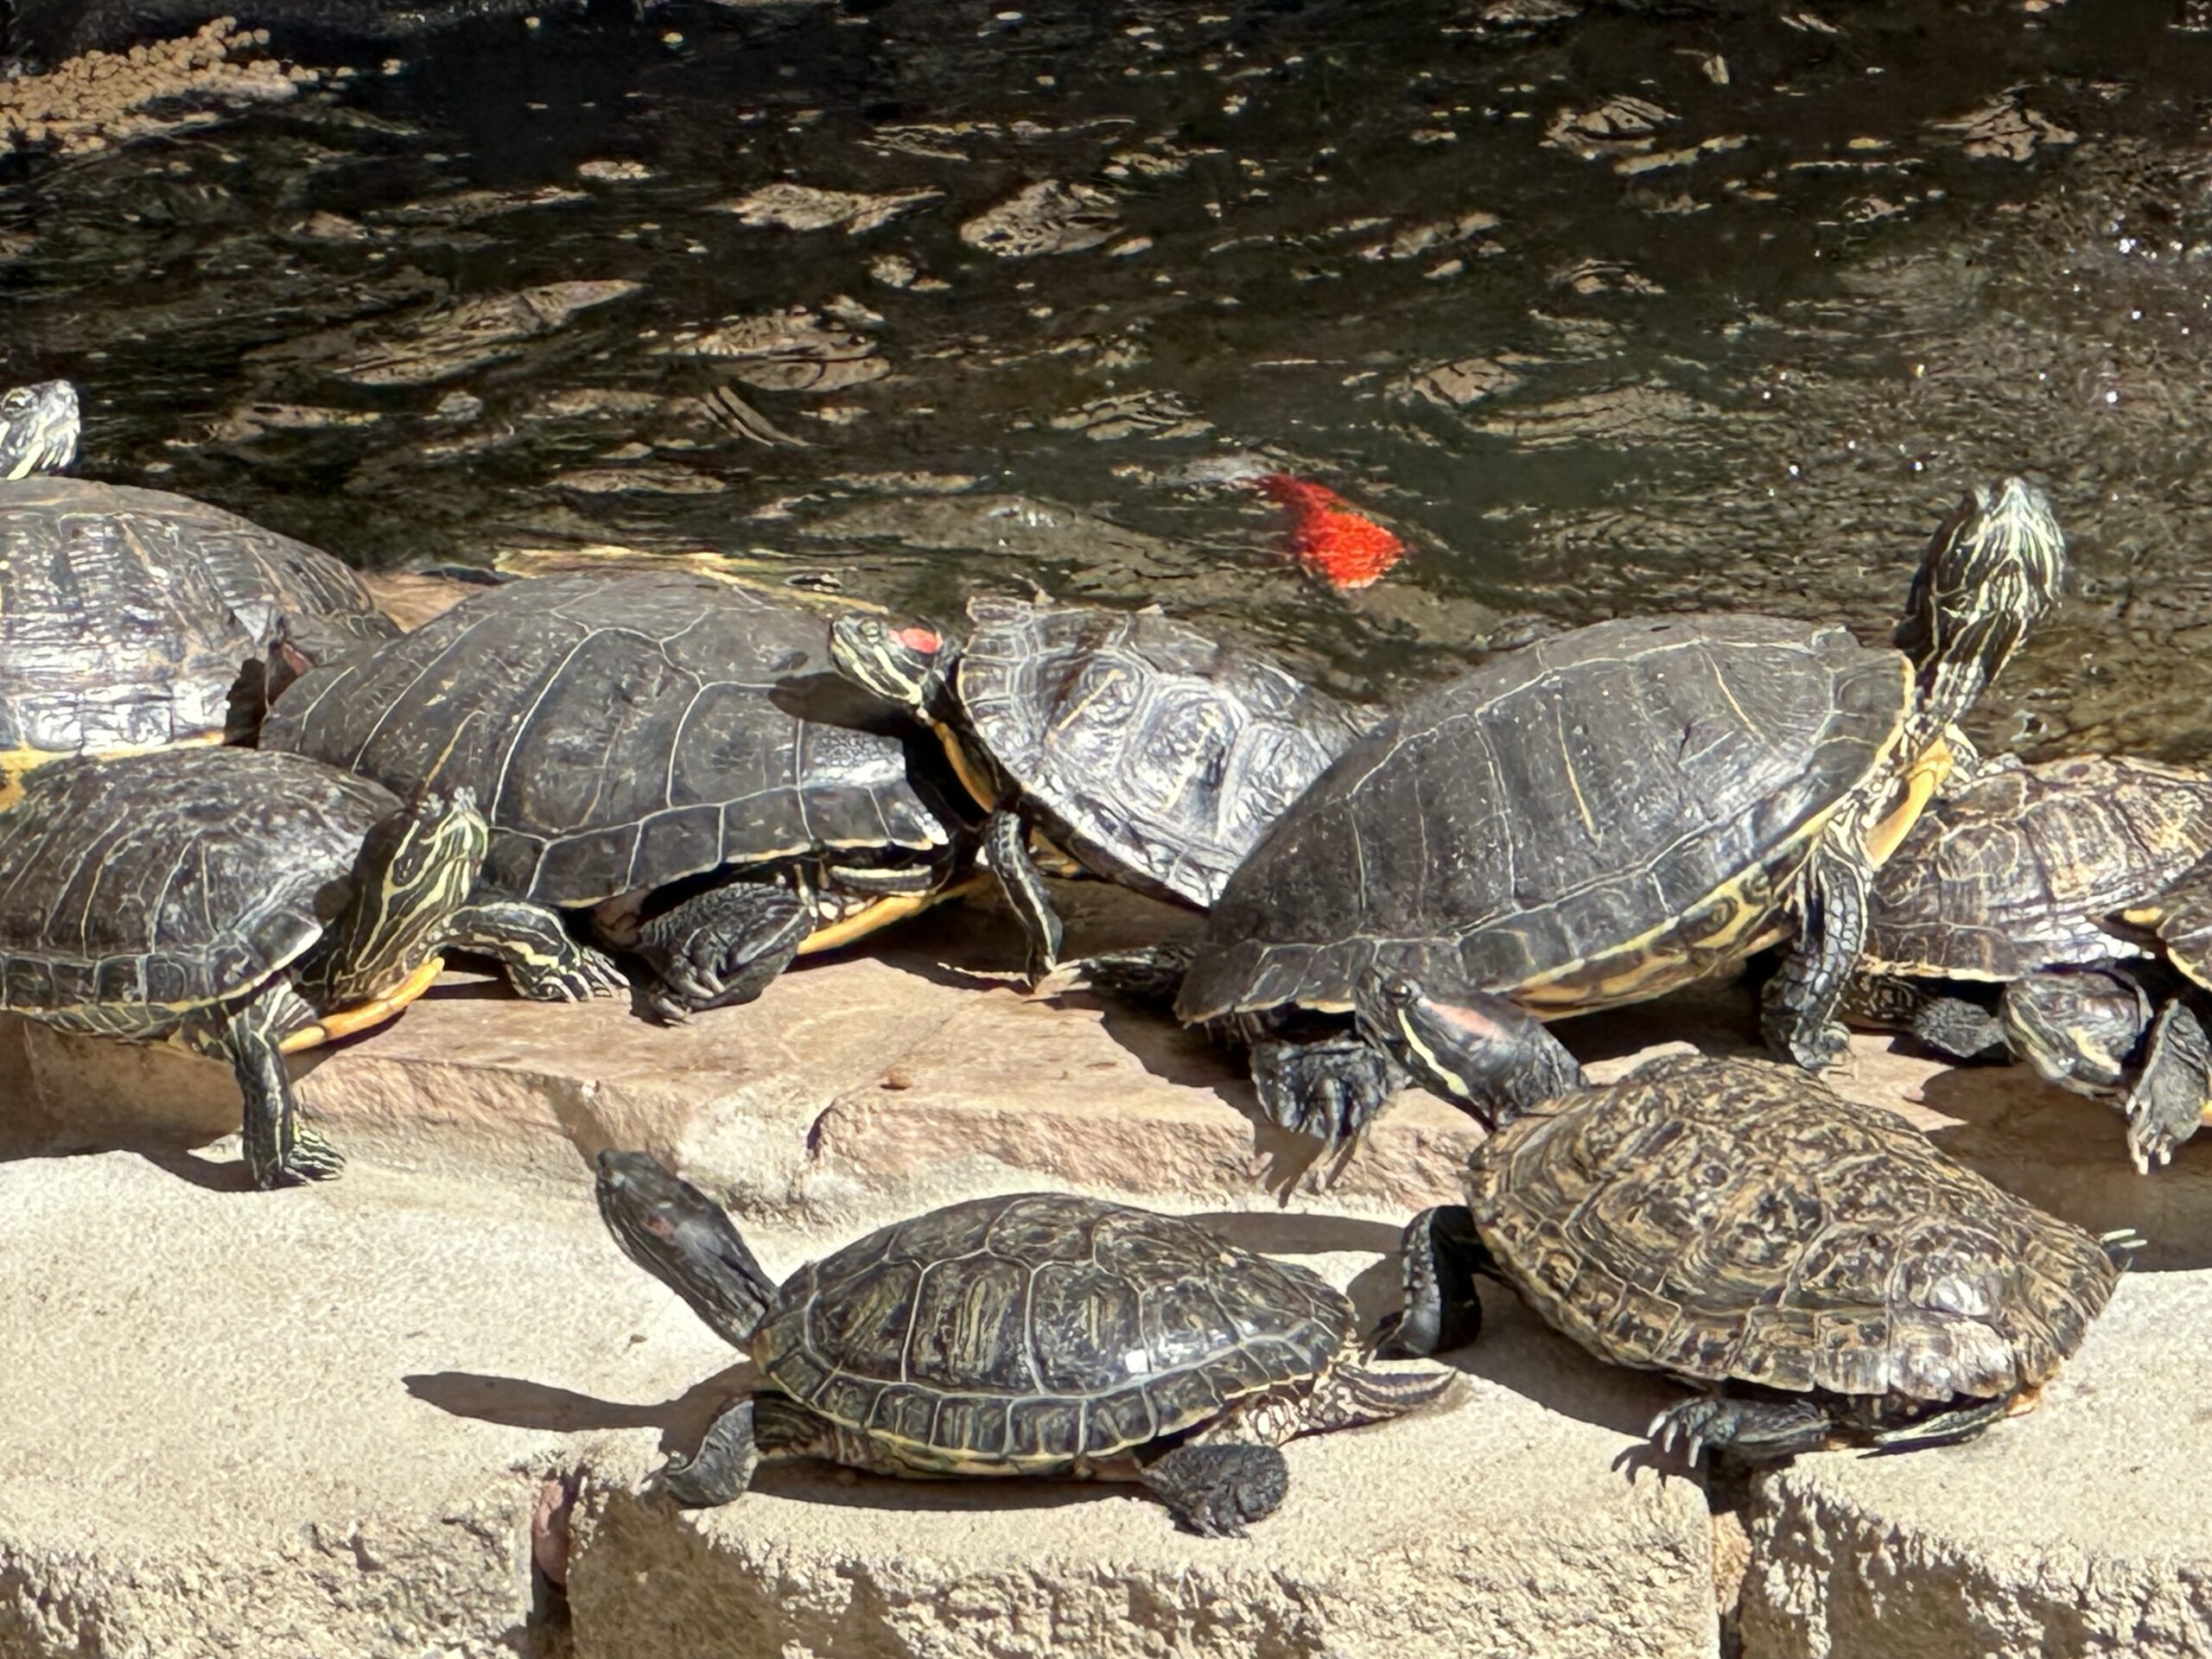 Rescued turtles basking in the sun at one of our dedicated turtle pond habitats.